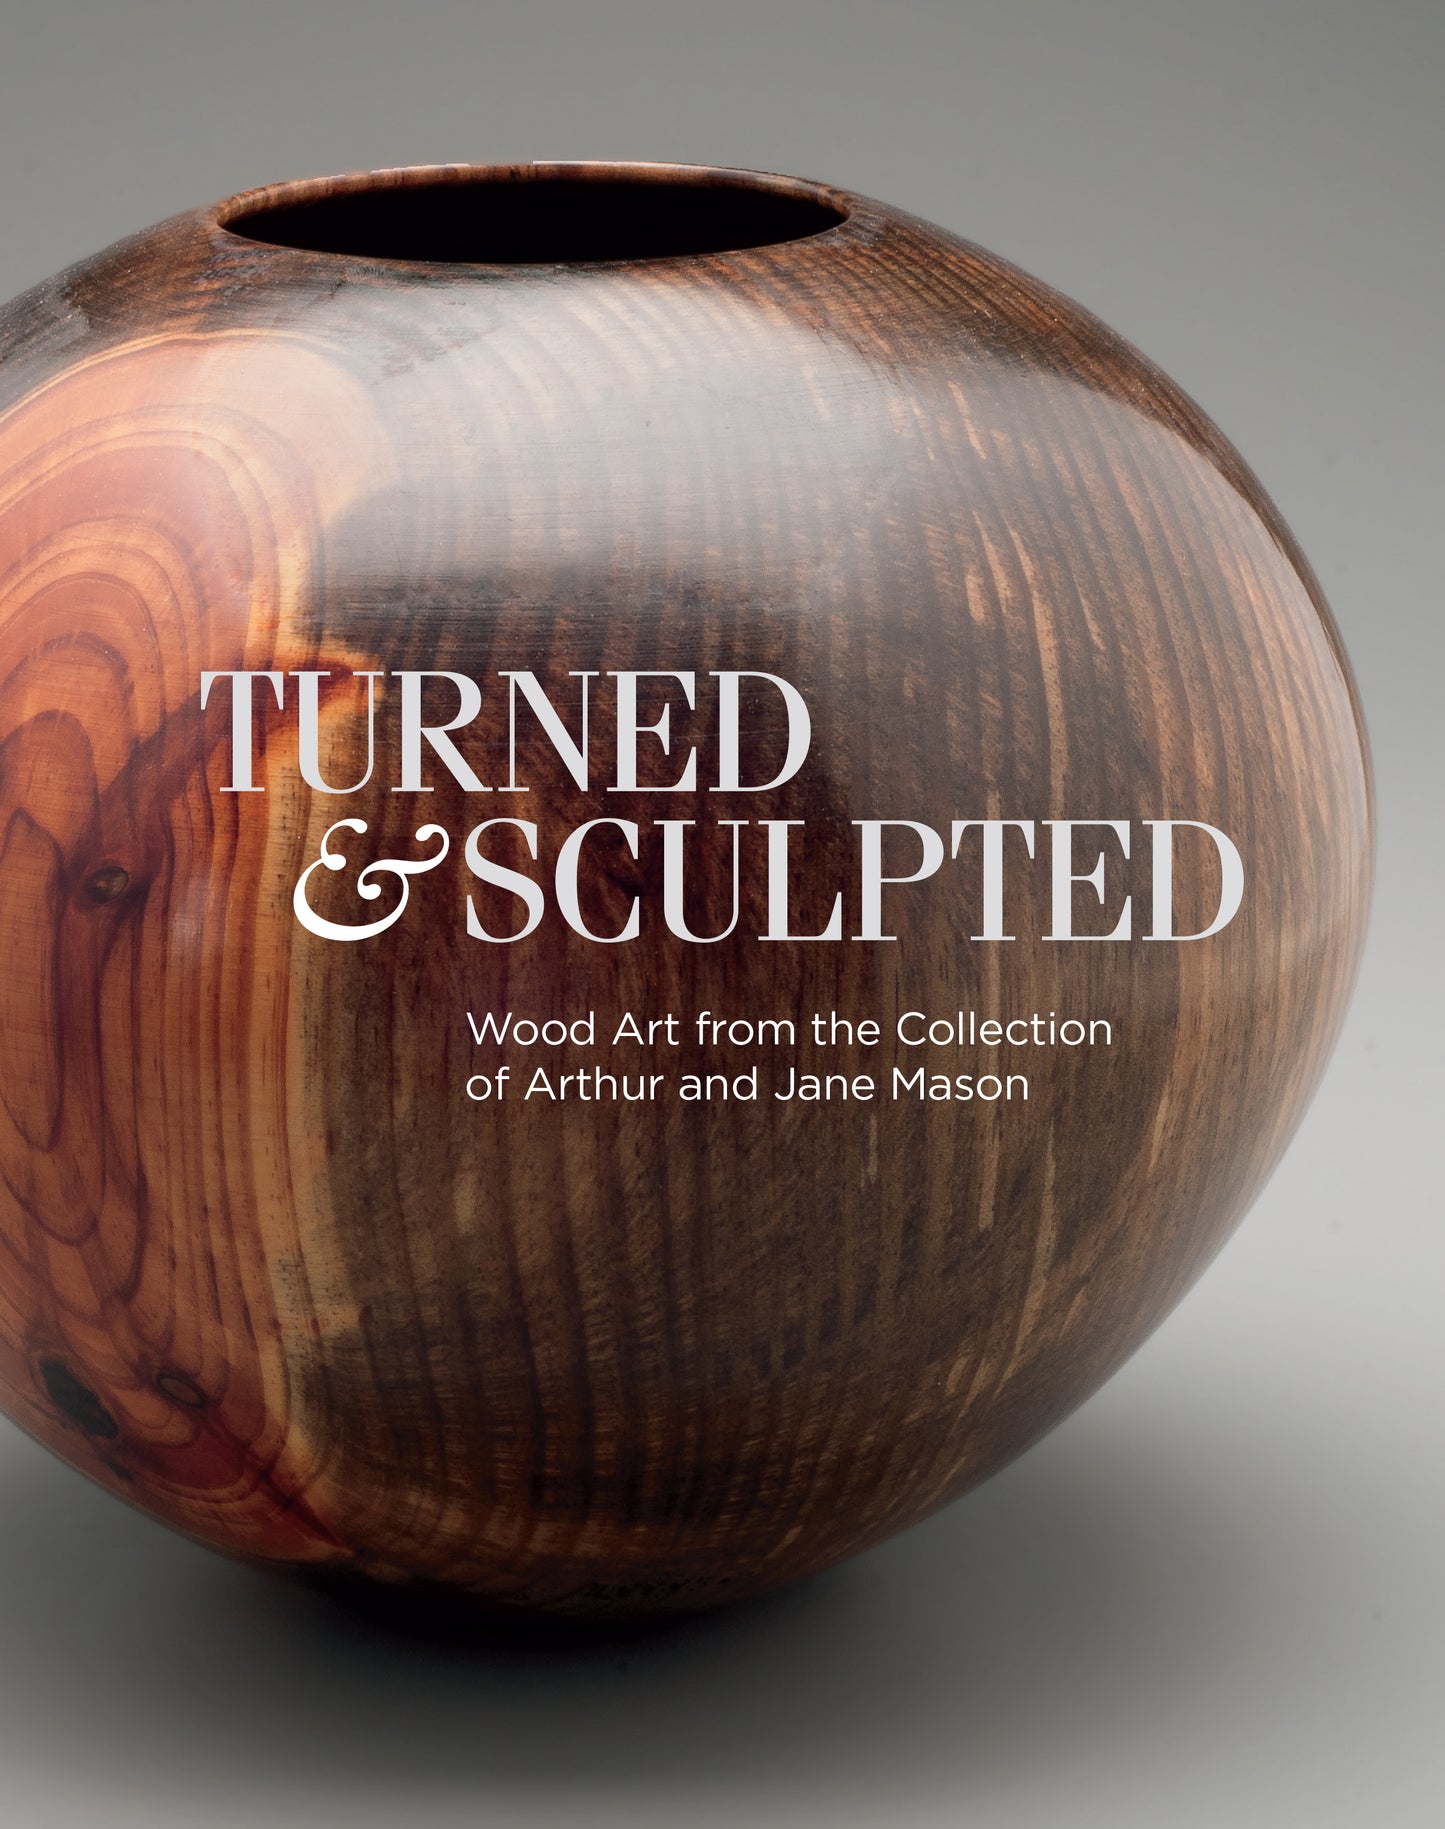 Turned and Sculpted: Wood Art from the Collection of Arthur and Jane Mason